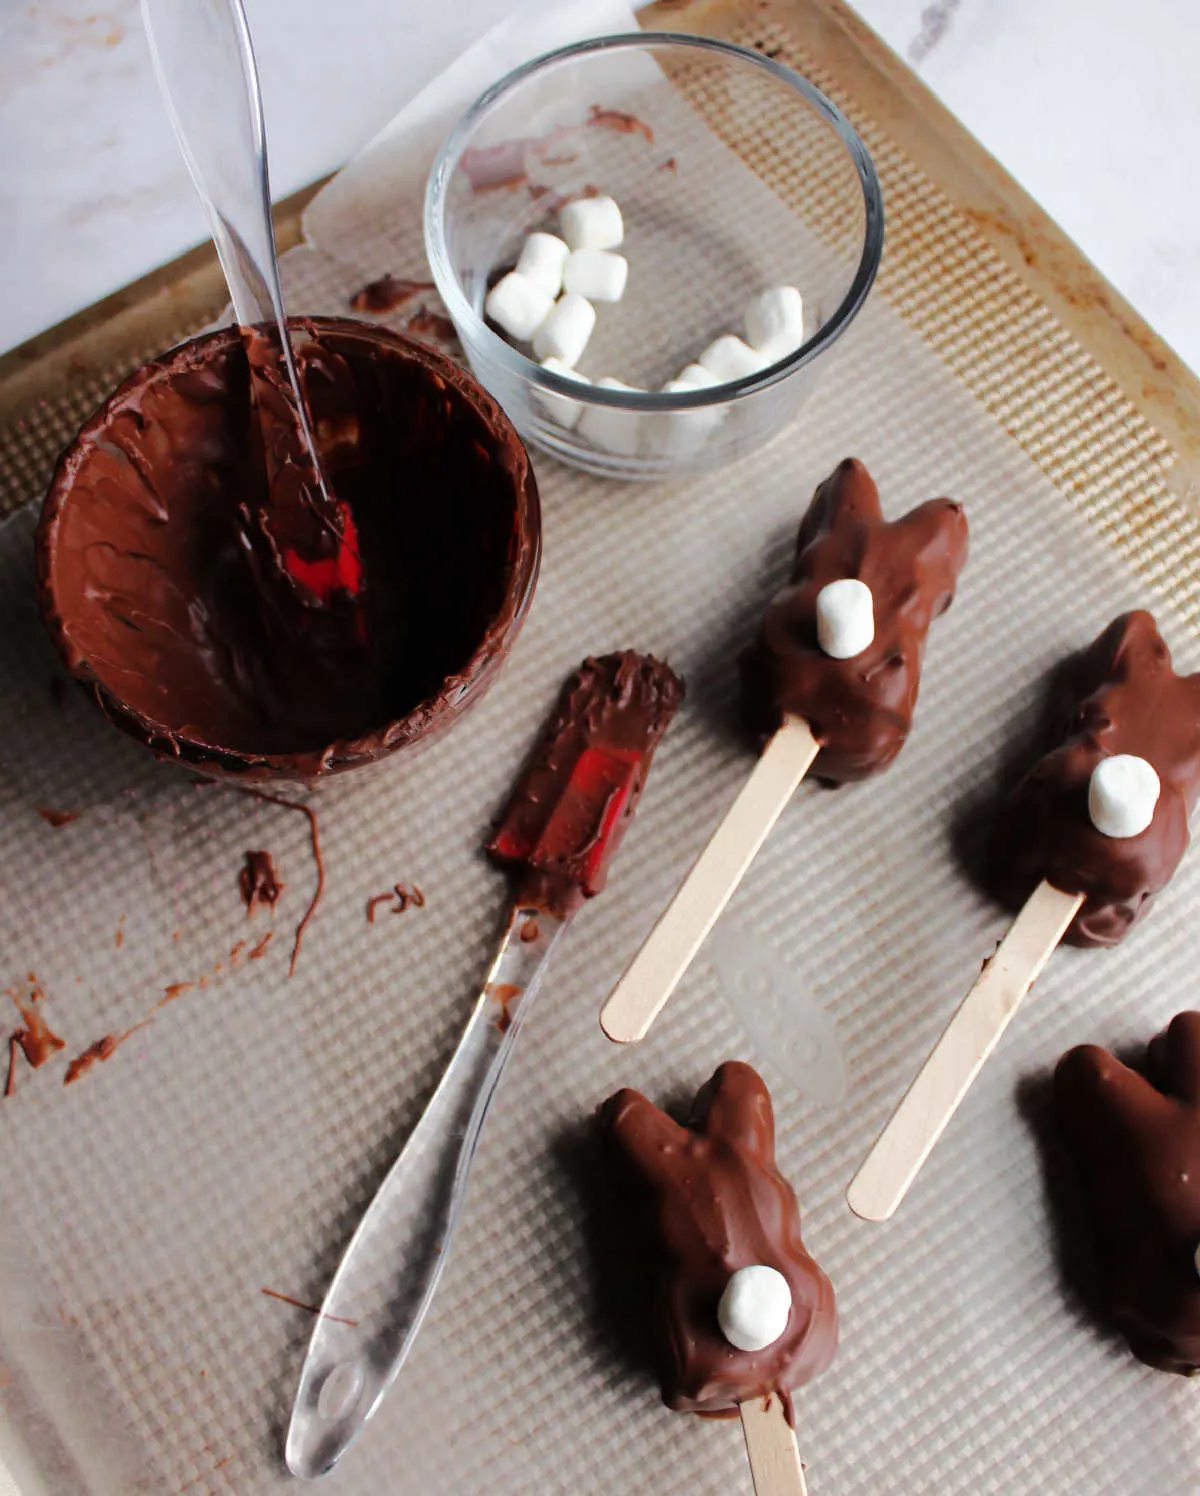 Chocolate coated marshmallow bunnies setting up on wax paper.